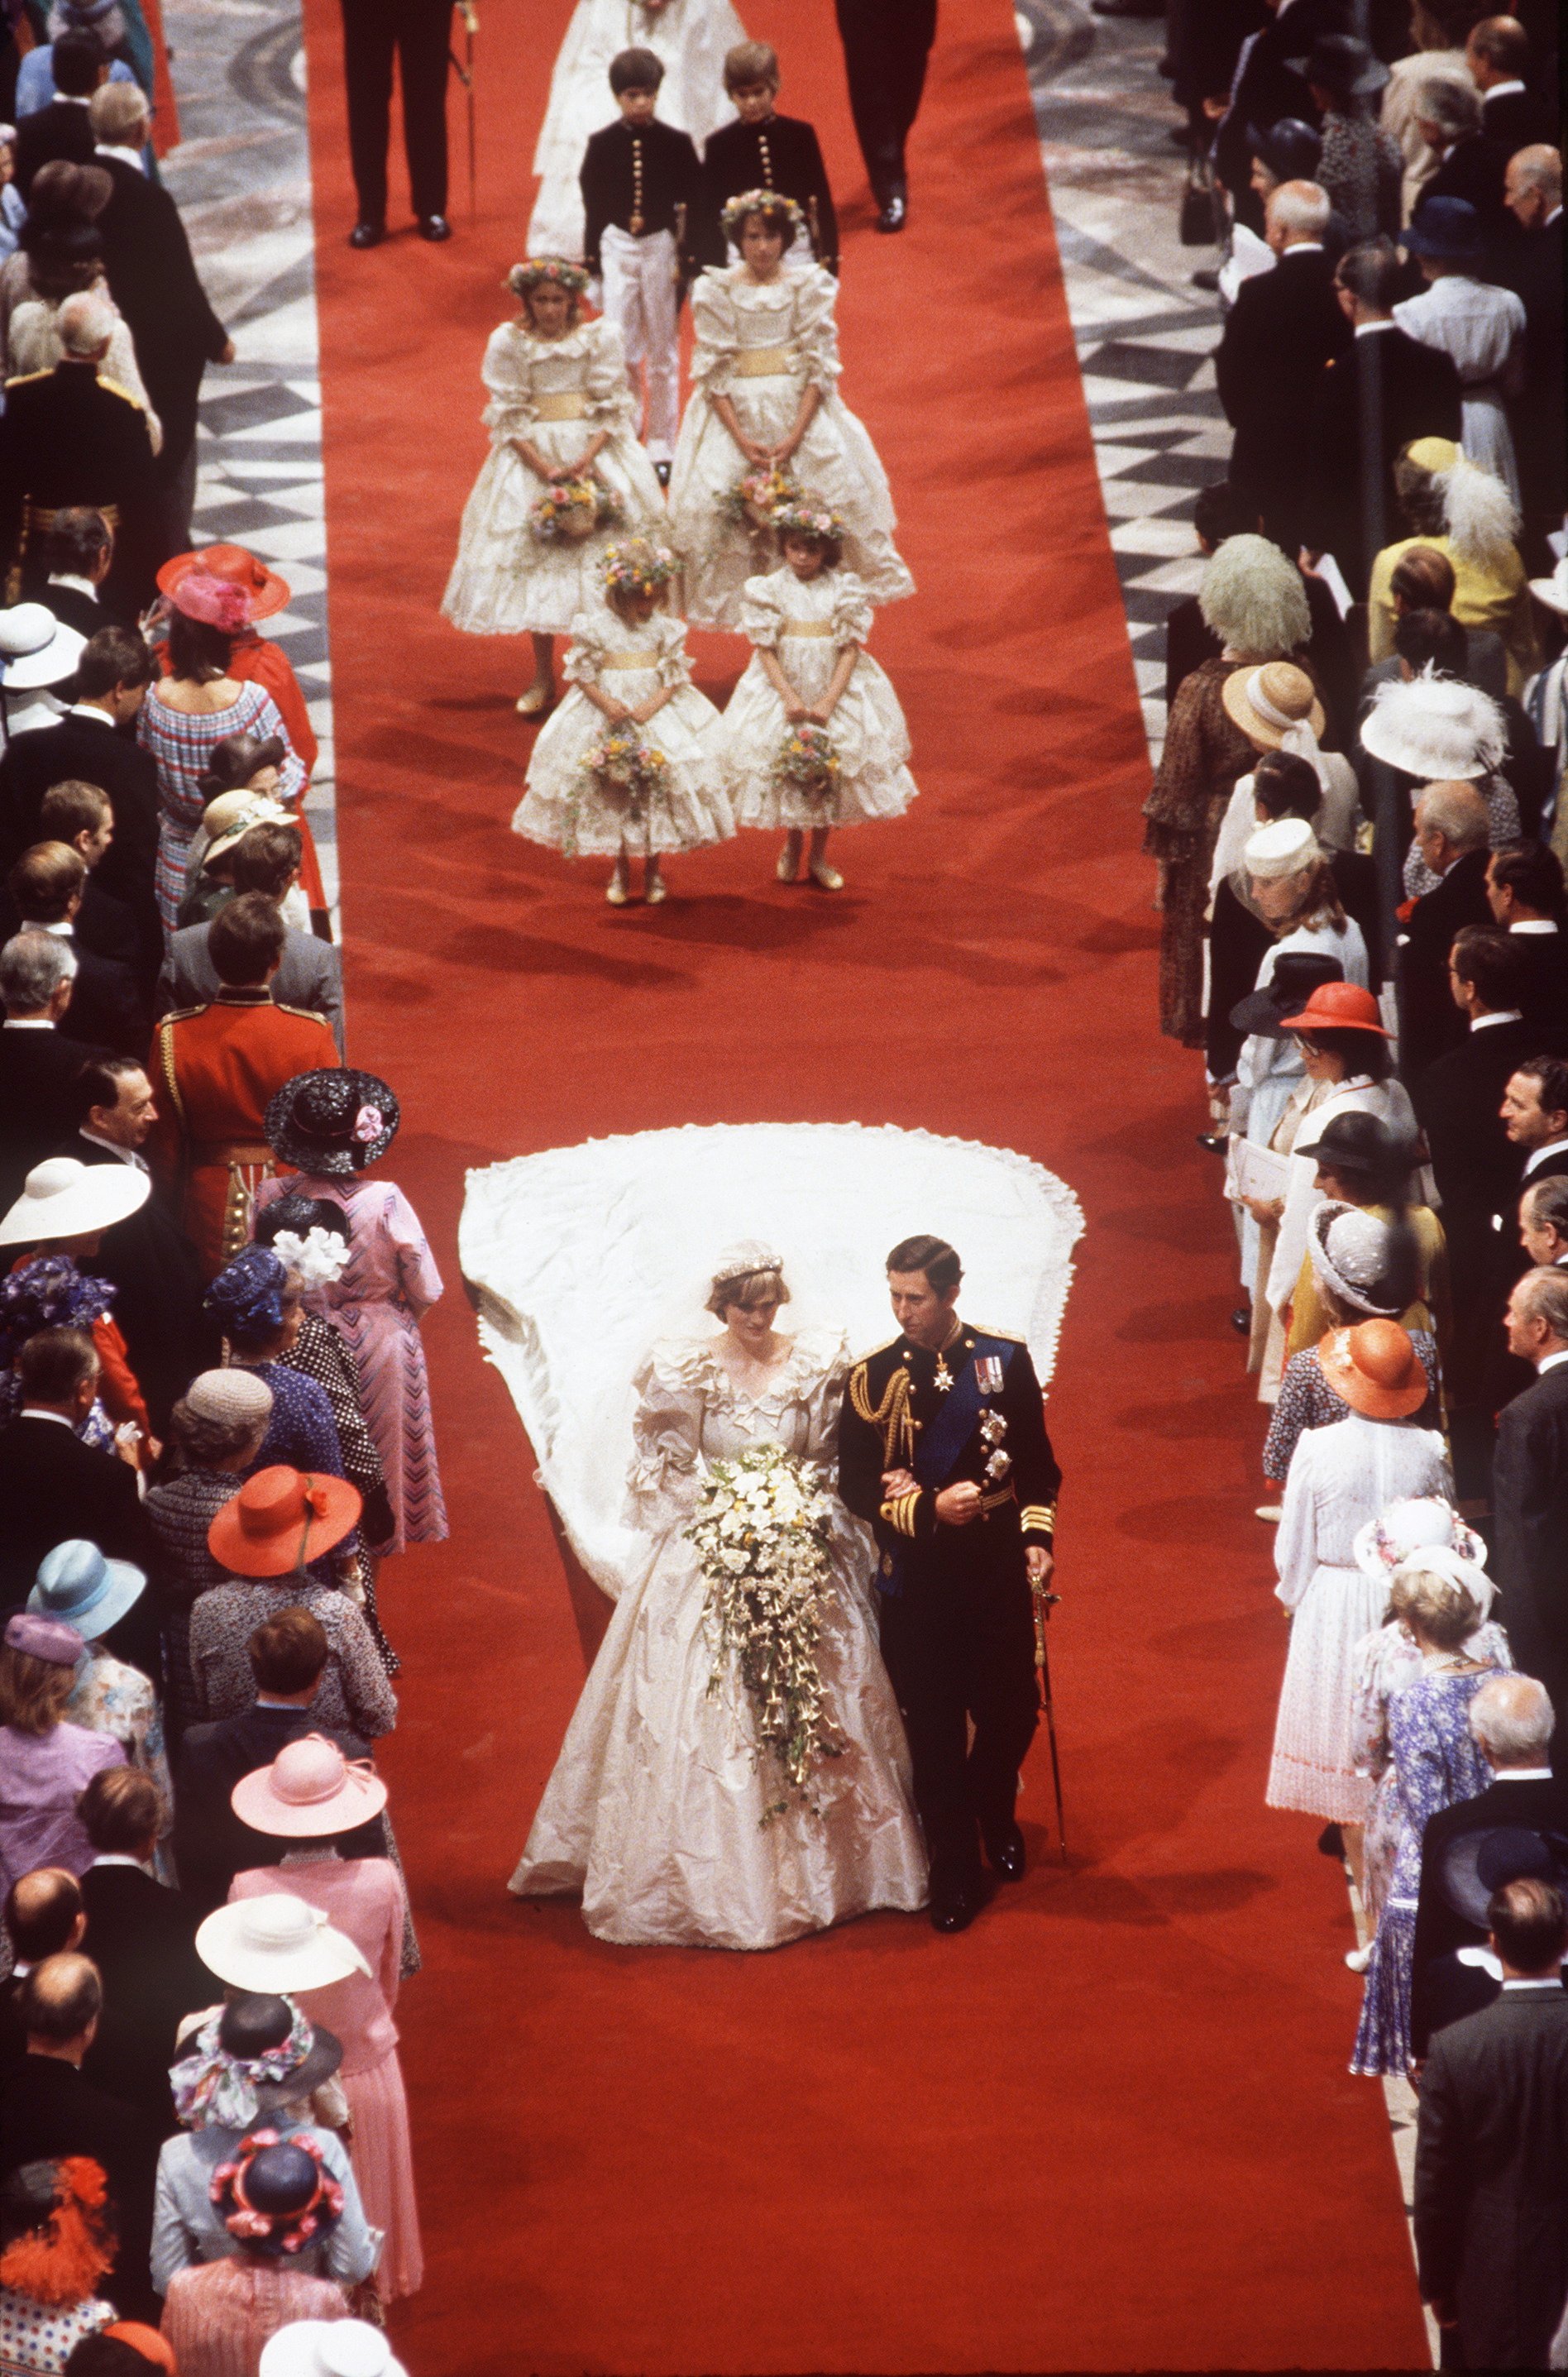 Princess Diana and Prince Charles walking down the aisle of St. Paul's on their wedding day followed by their bridesmaids and pageboys